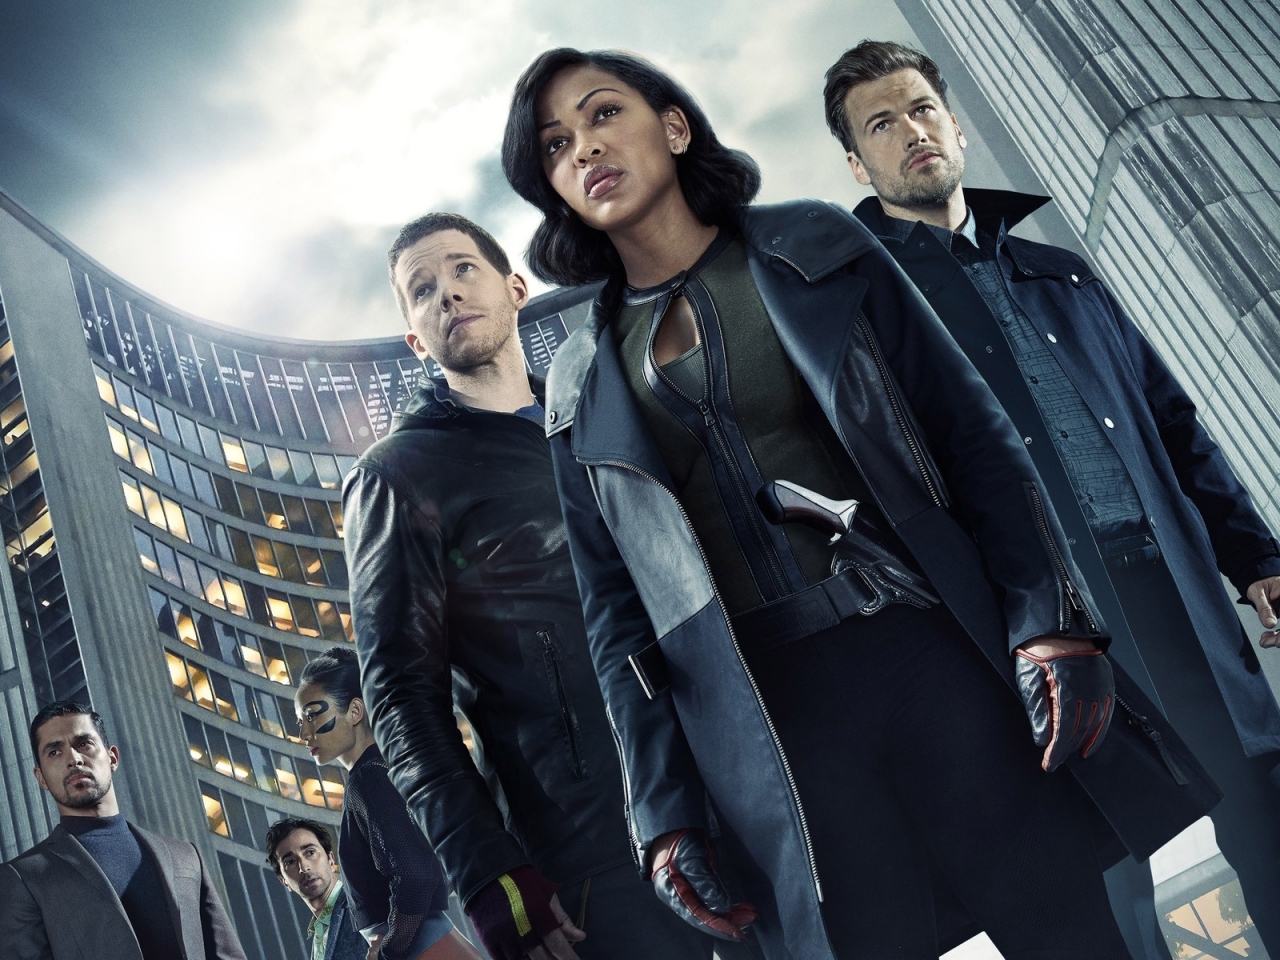 Minority Report Cast for 1280 x 960 resolution